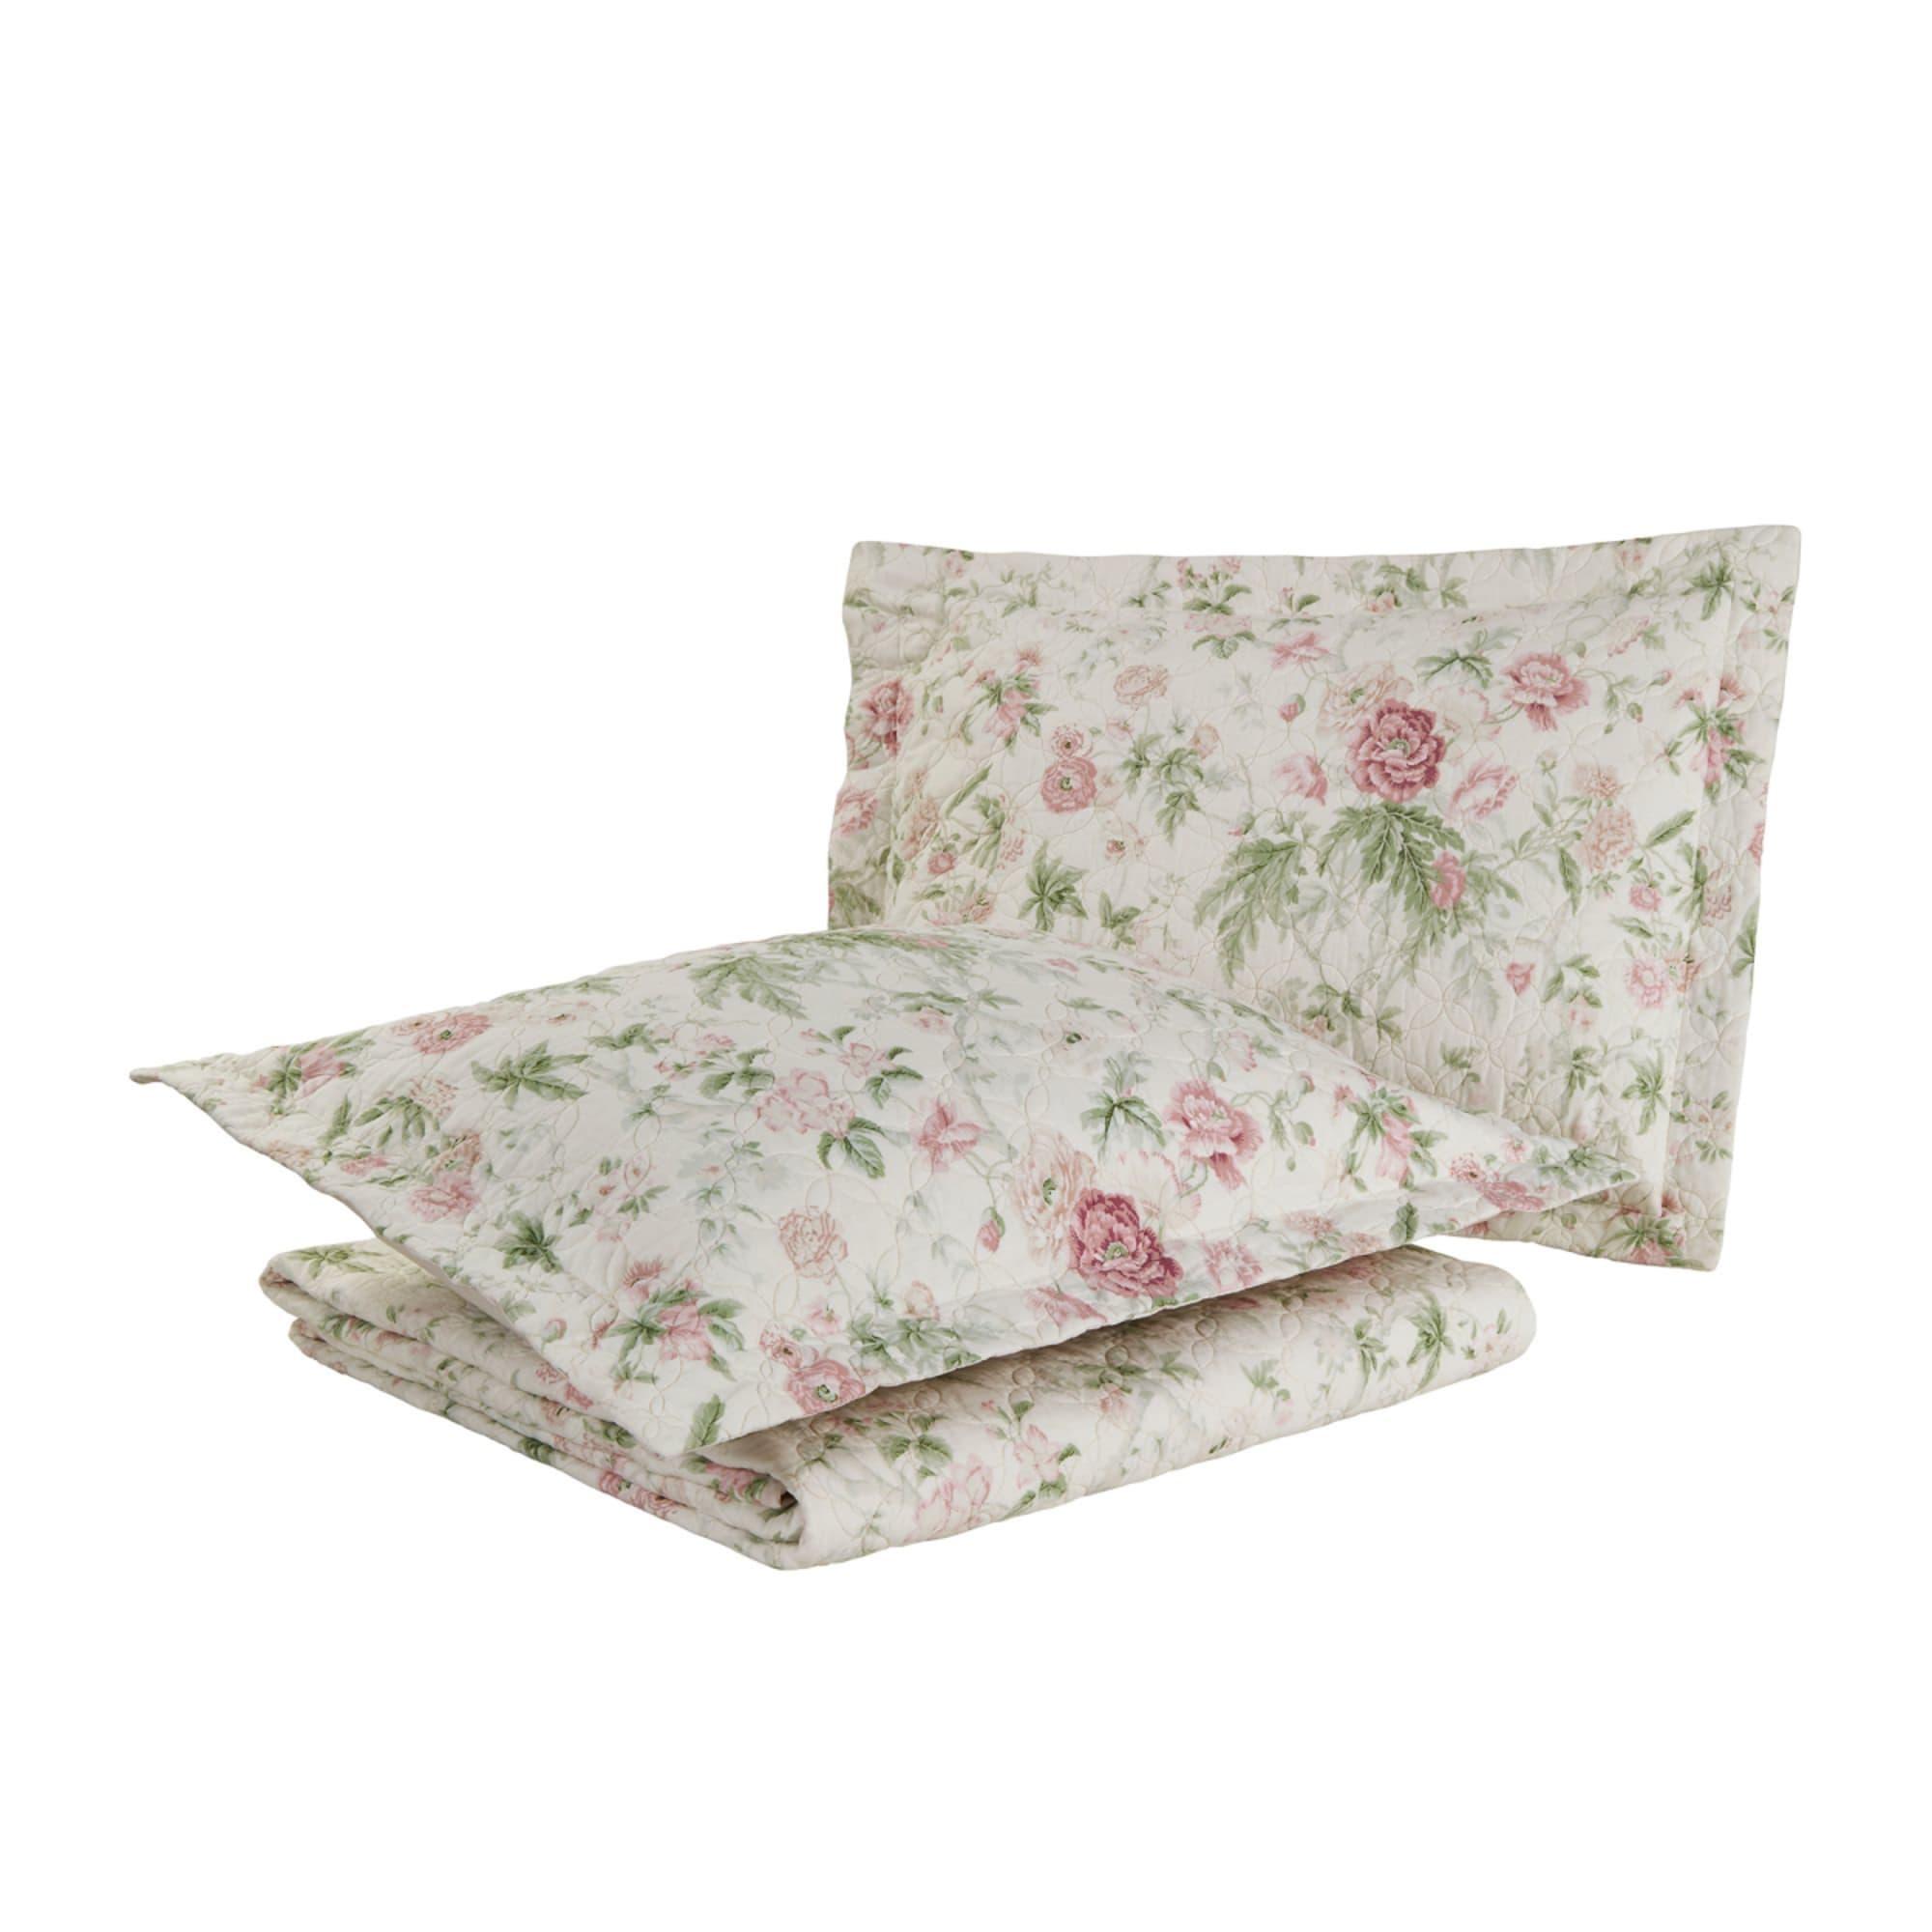 Laura Ashley Breezy Floral Printed Coverlet Set Queen Image 5